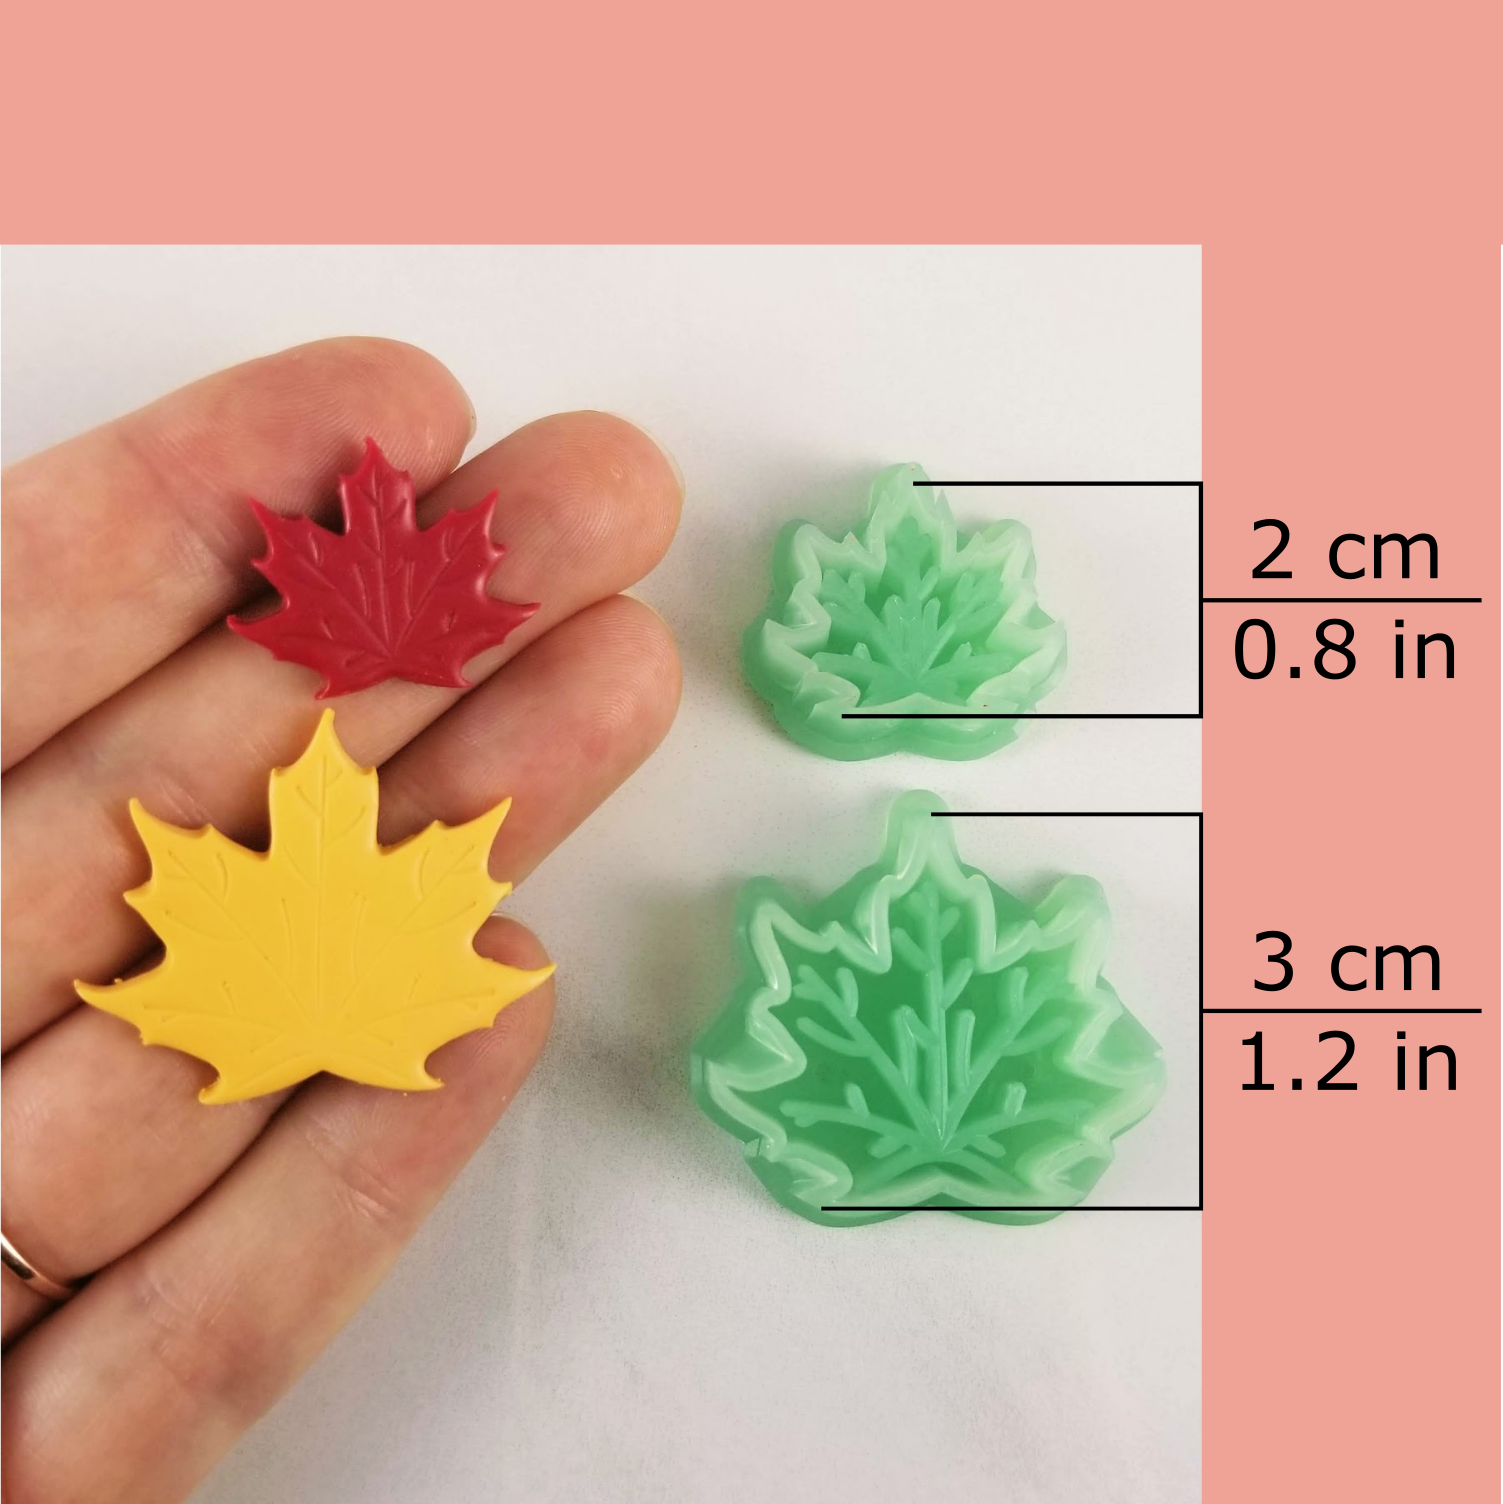 Small maple leaf polymer clay cutters with dimensions shown. Great for stud earrings and small dangle earrings.